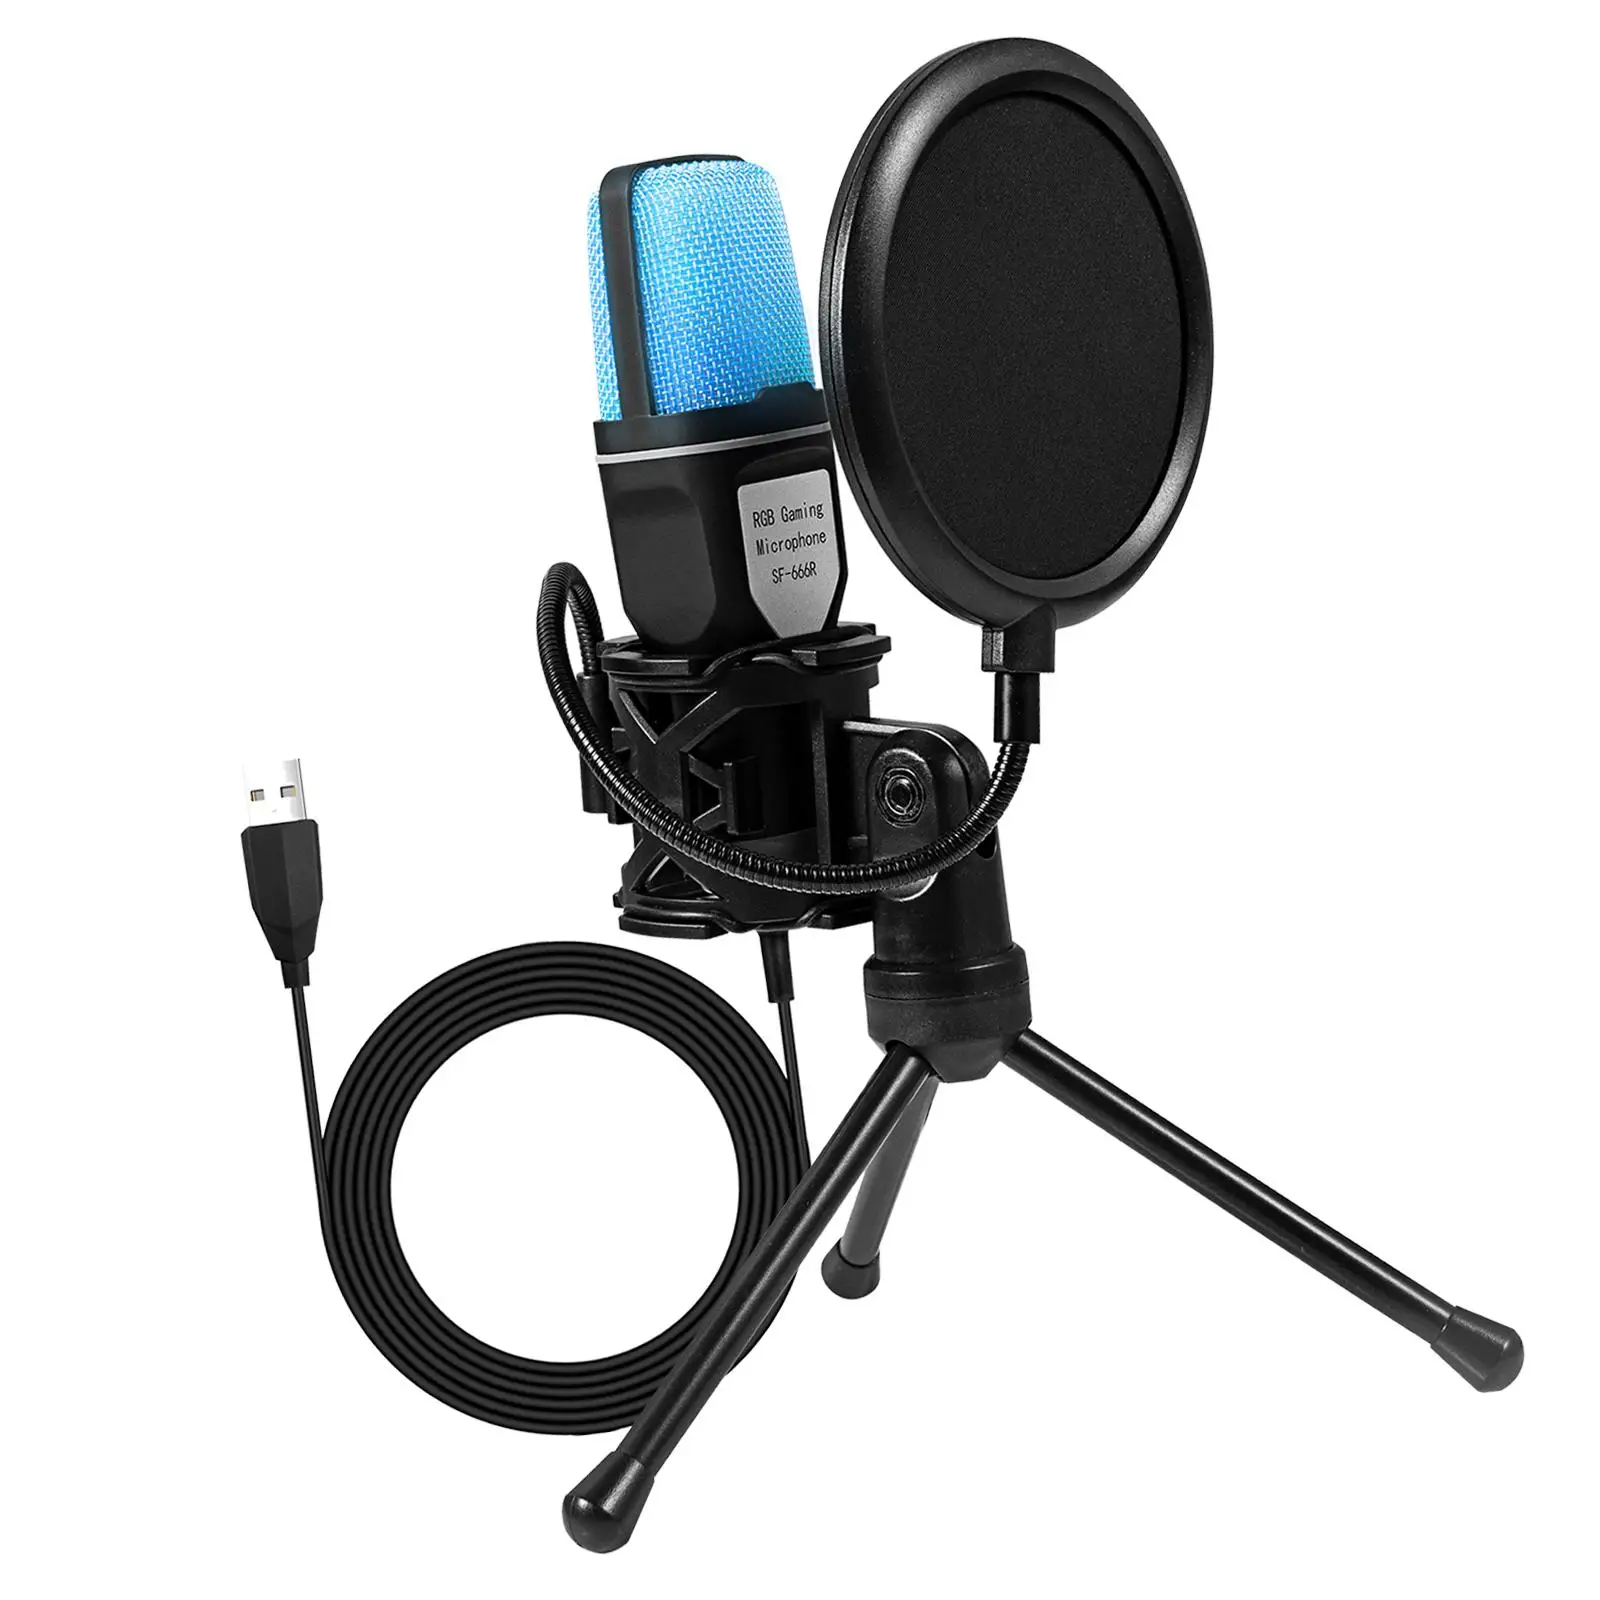 Condenser Microphone Adjustable Noise Reduction USB Interface Computer Mic for Video Recording Singing Streaming Music Studio